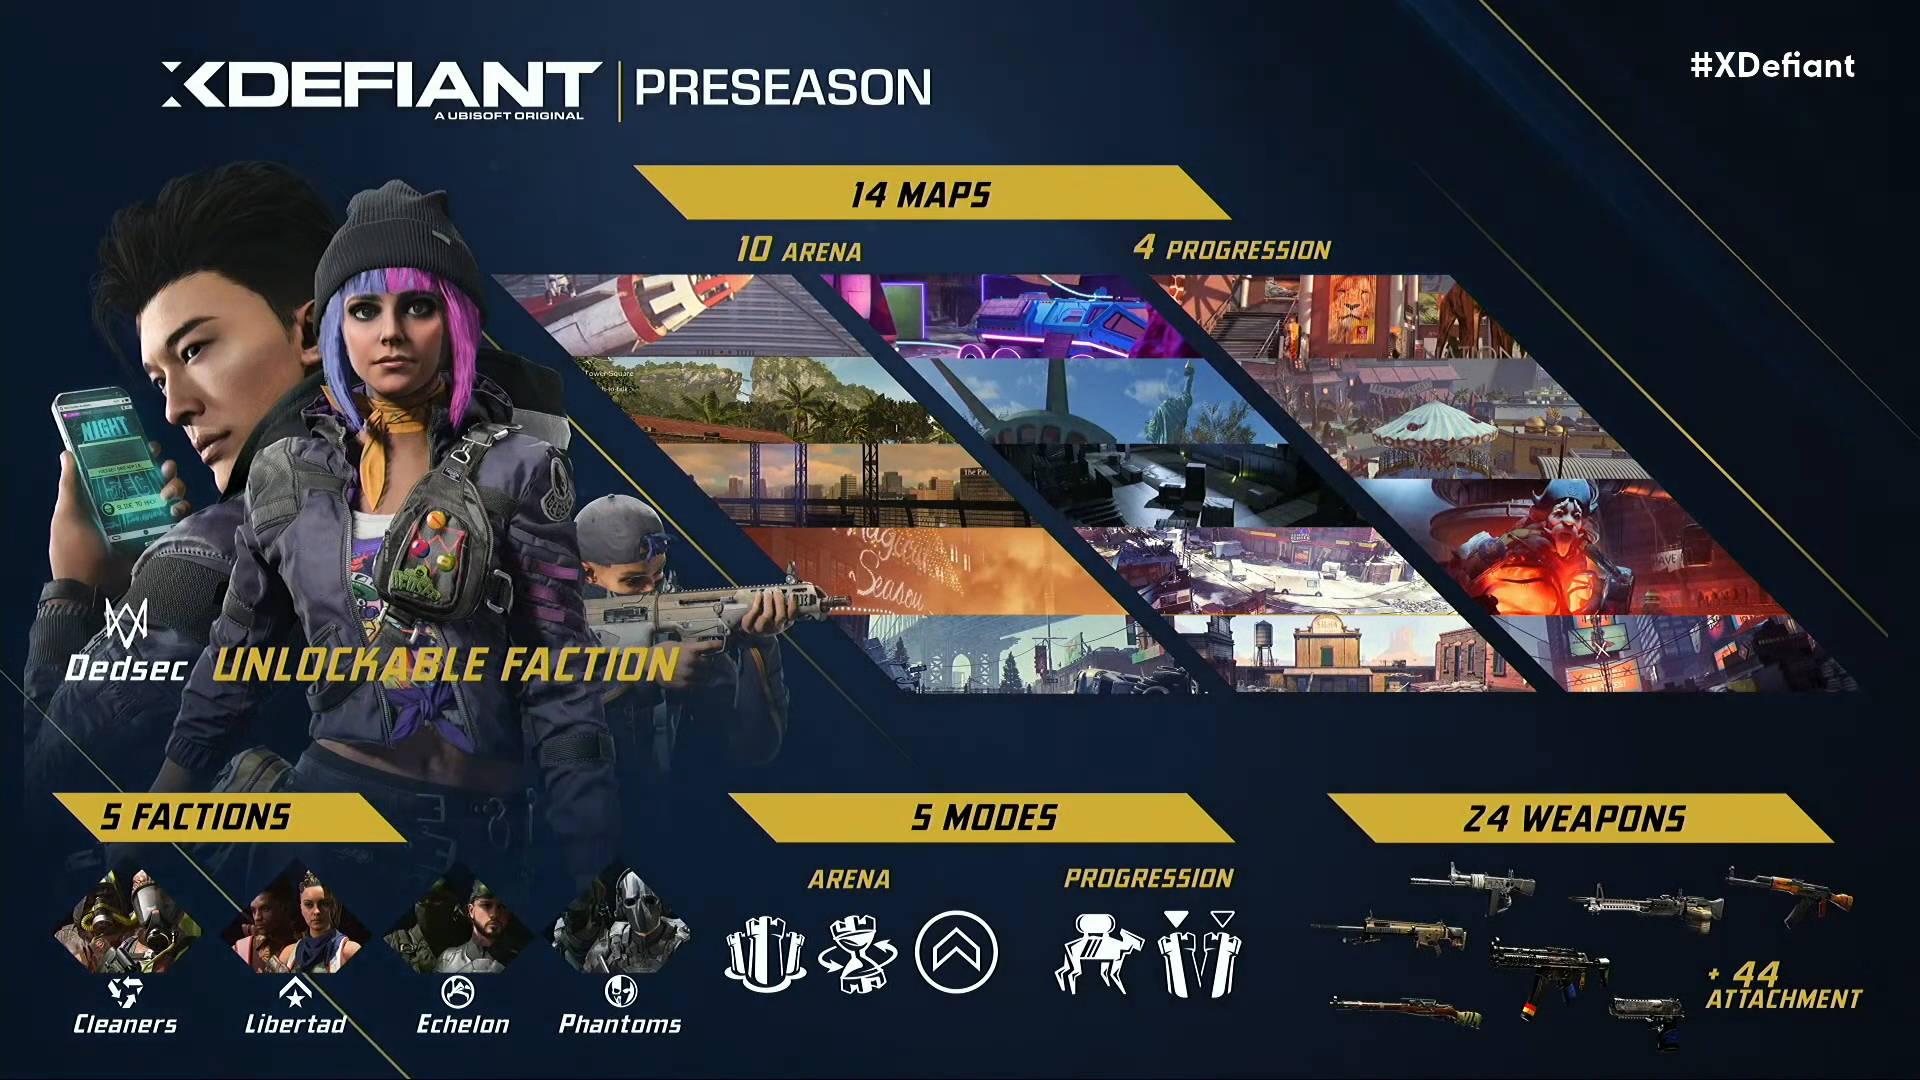 XDefiant release date: the preseason for the launch of the FPS game, including all maps factions, modes, and weapons.